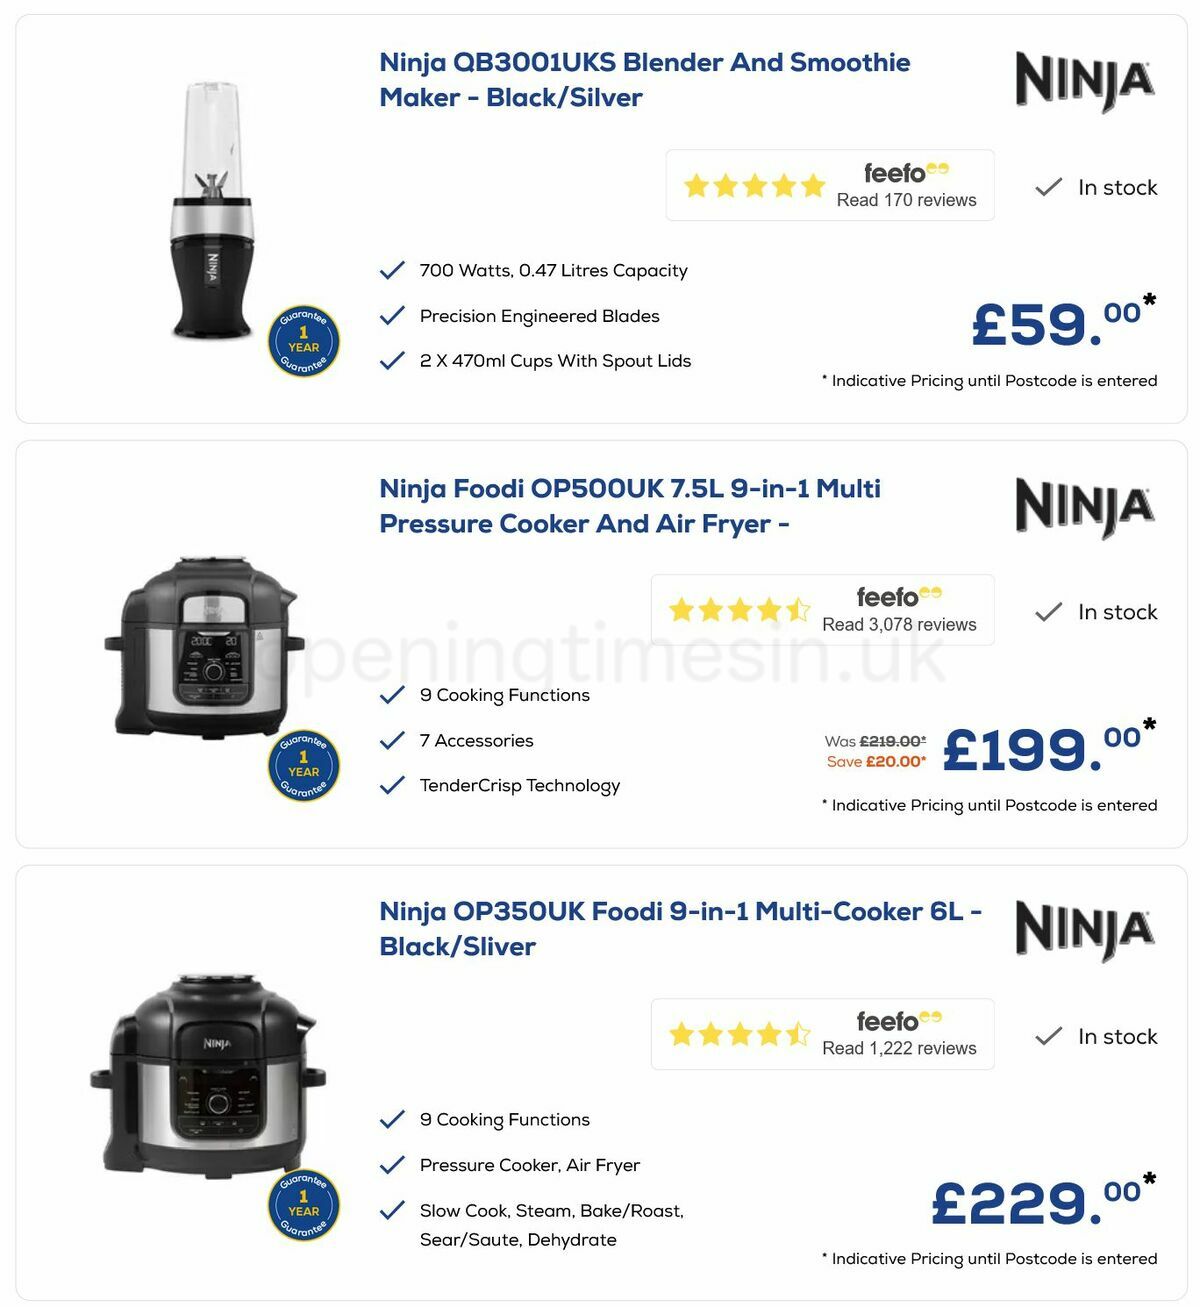 Euronics Offers from 30 April